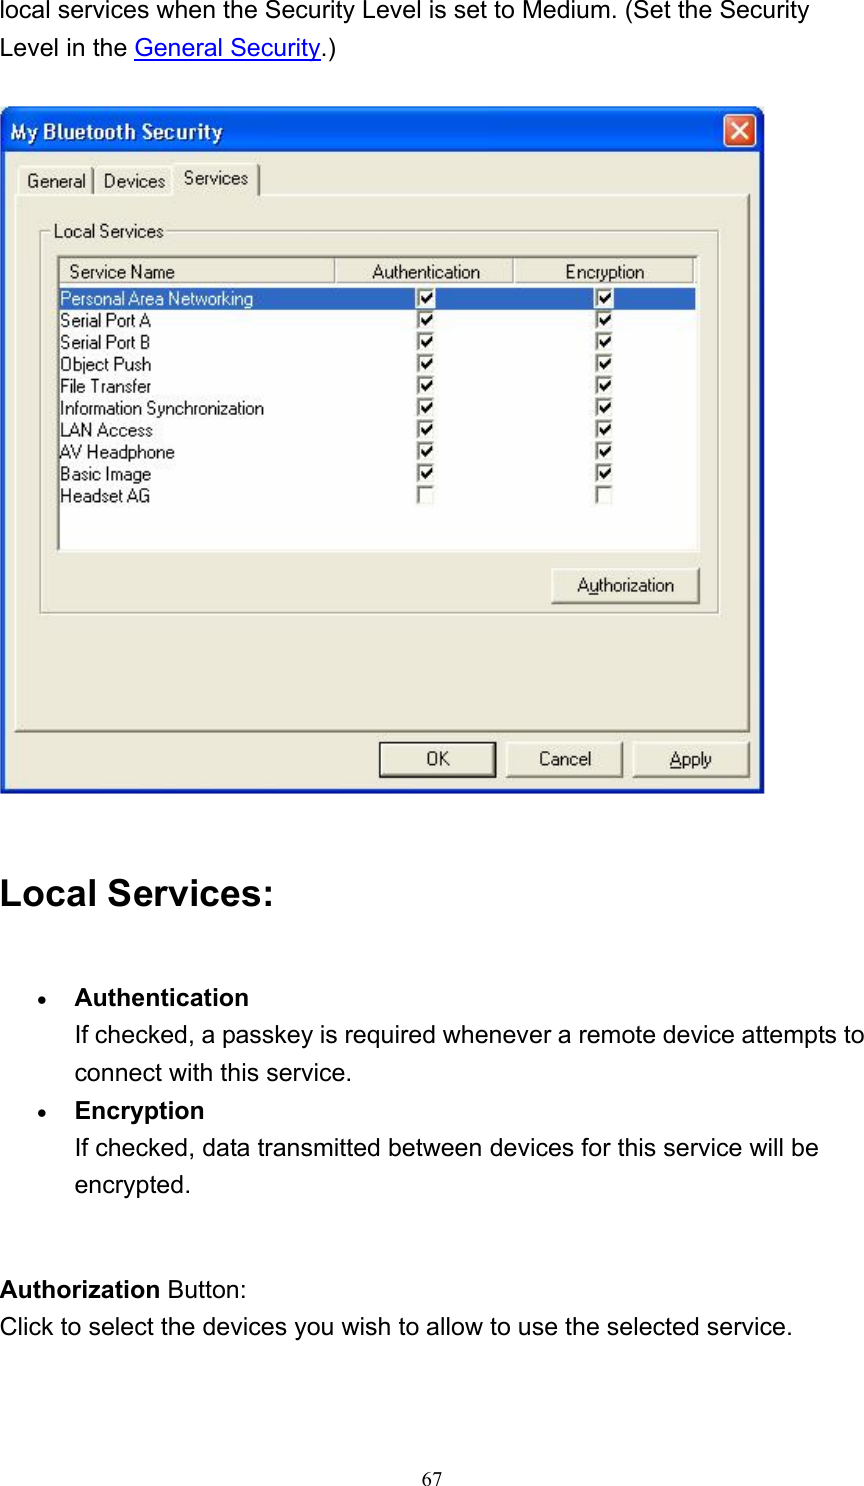   67local services when the Security Level is set to Medium. (Set the Security Level in the General Security.)   Local Services: • Authentication If checked, a passkey is required whenever a remote device attempts to connect with this service.   • Encryption If checked, data transmitted between devices for this service will be encrypted.     Authorization Button: Click to select the devices you wish to allow to use the selected service. 